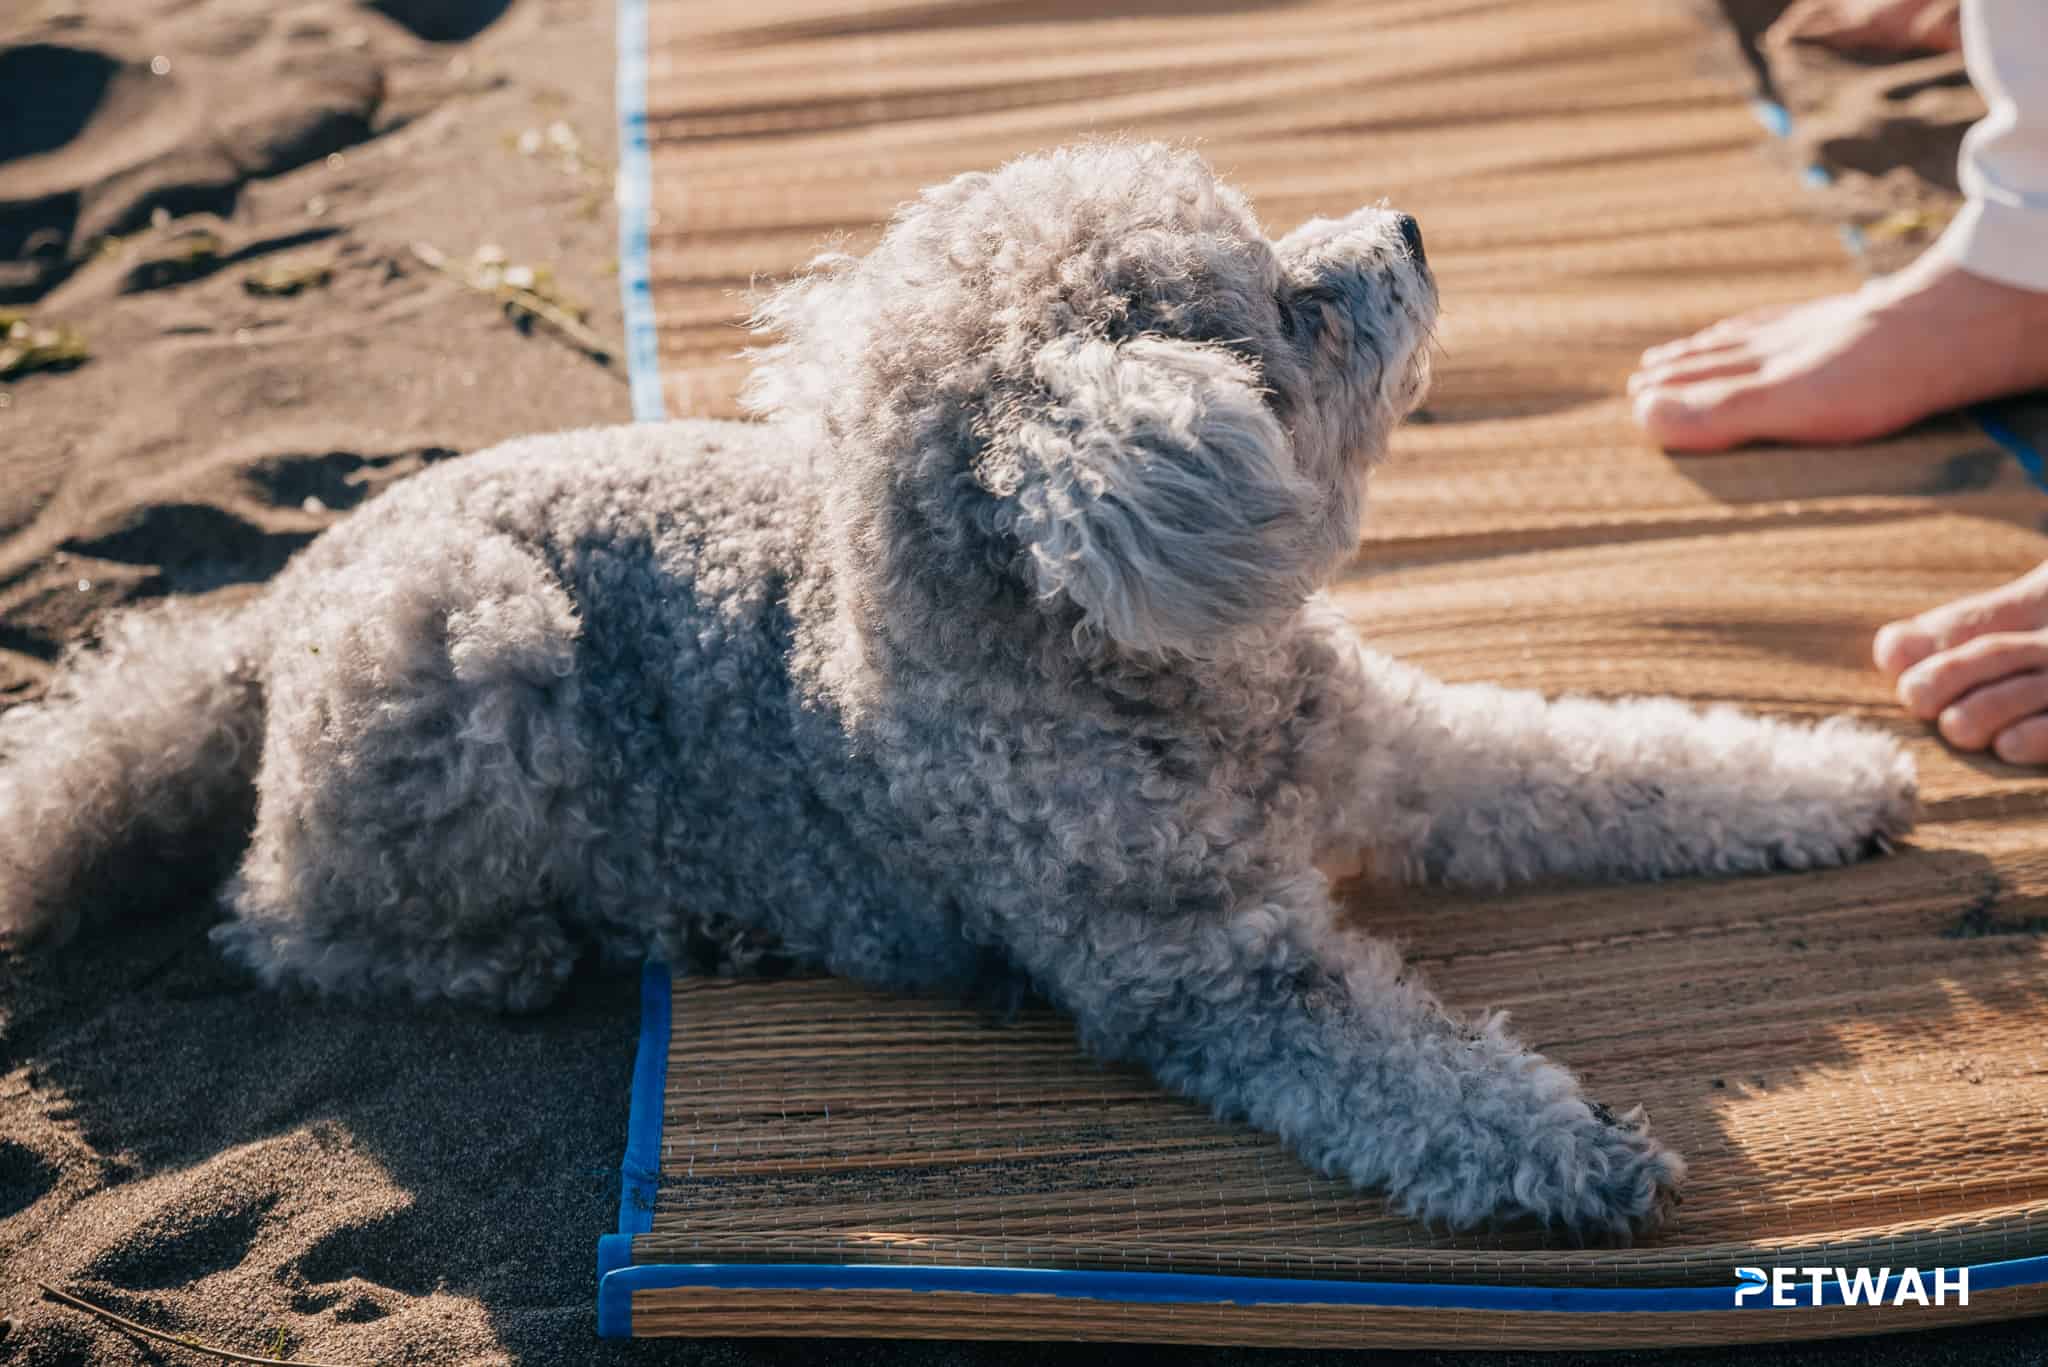 Planning Dog-Friendly Vacations with Your Poodle